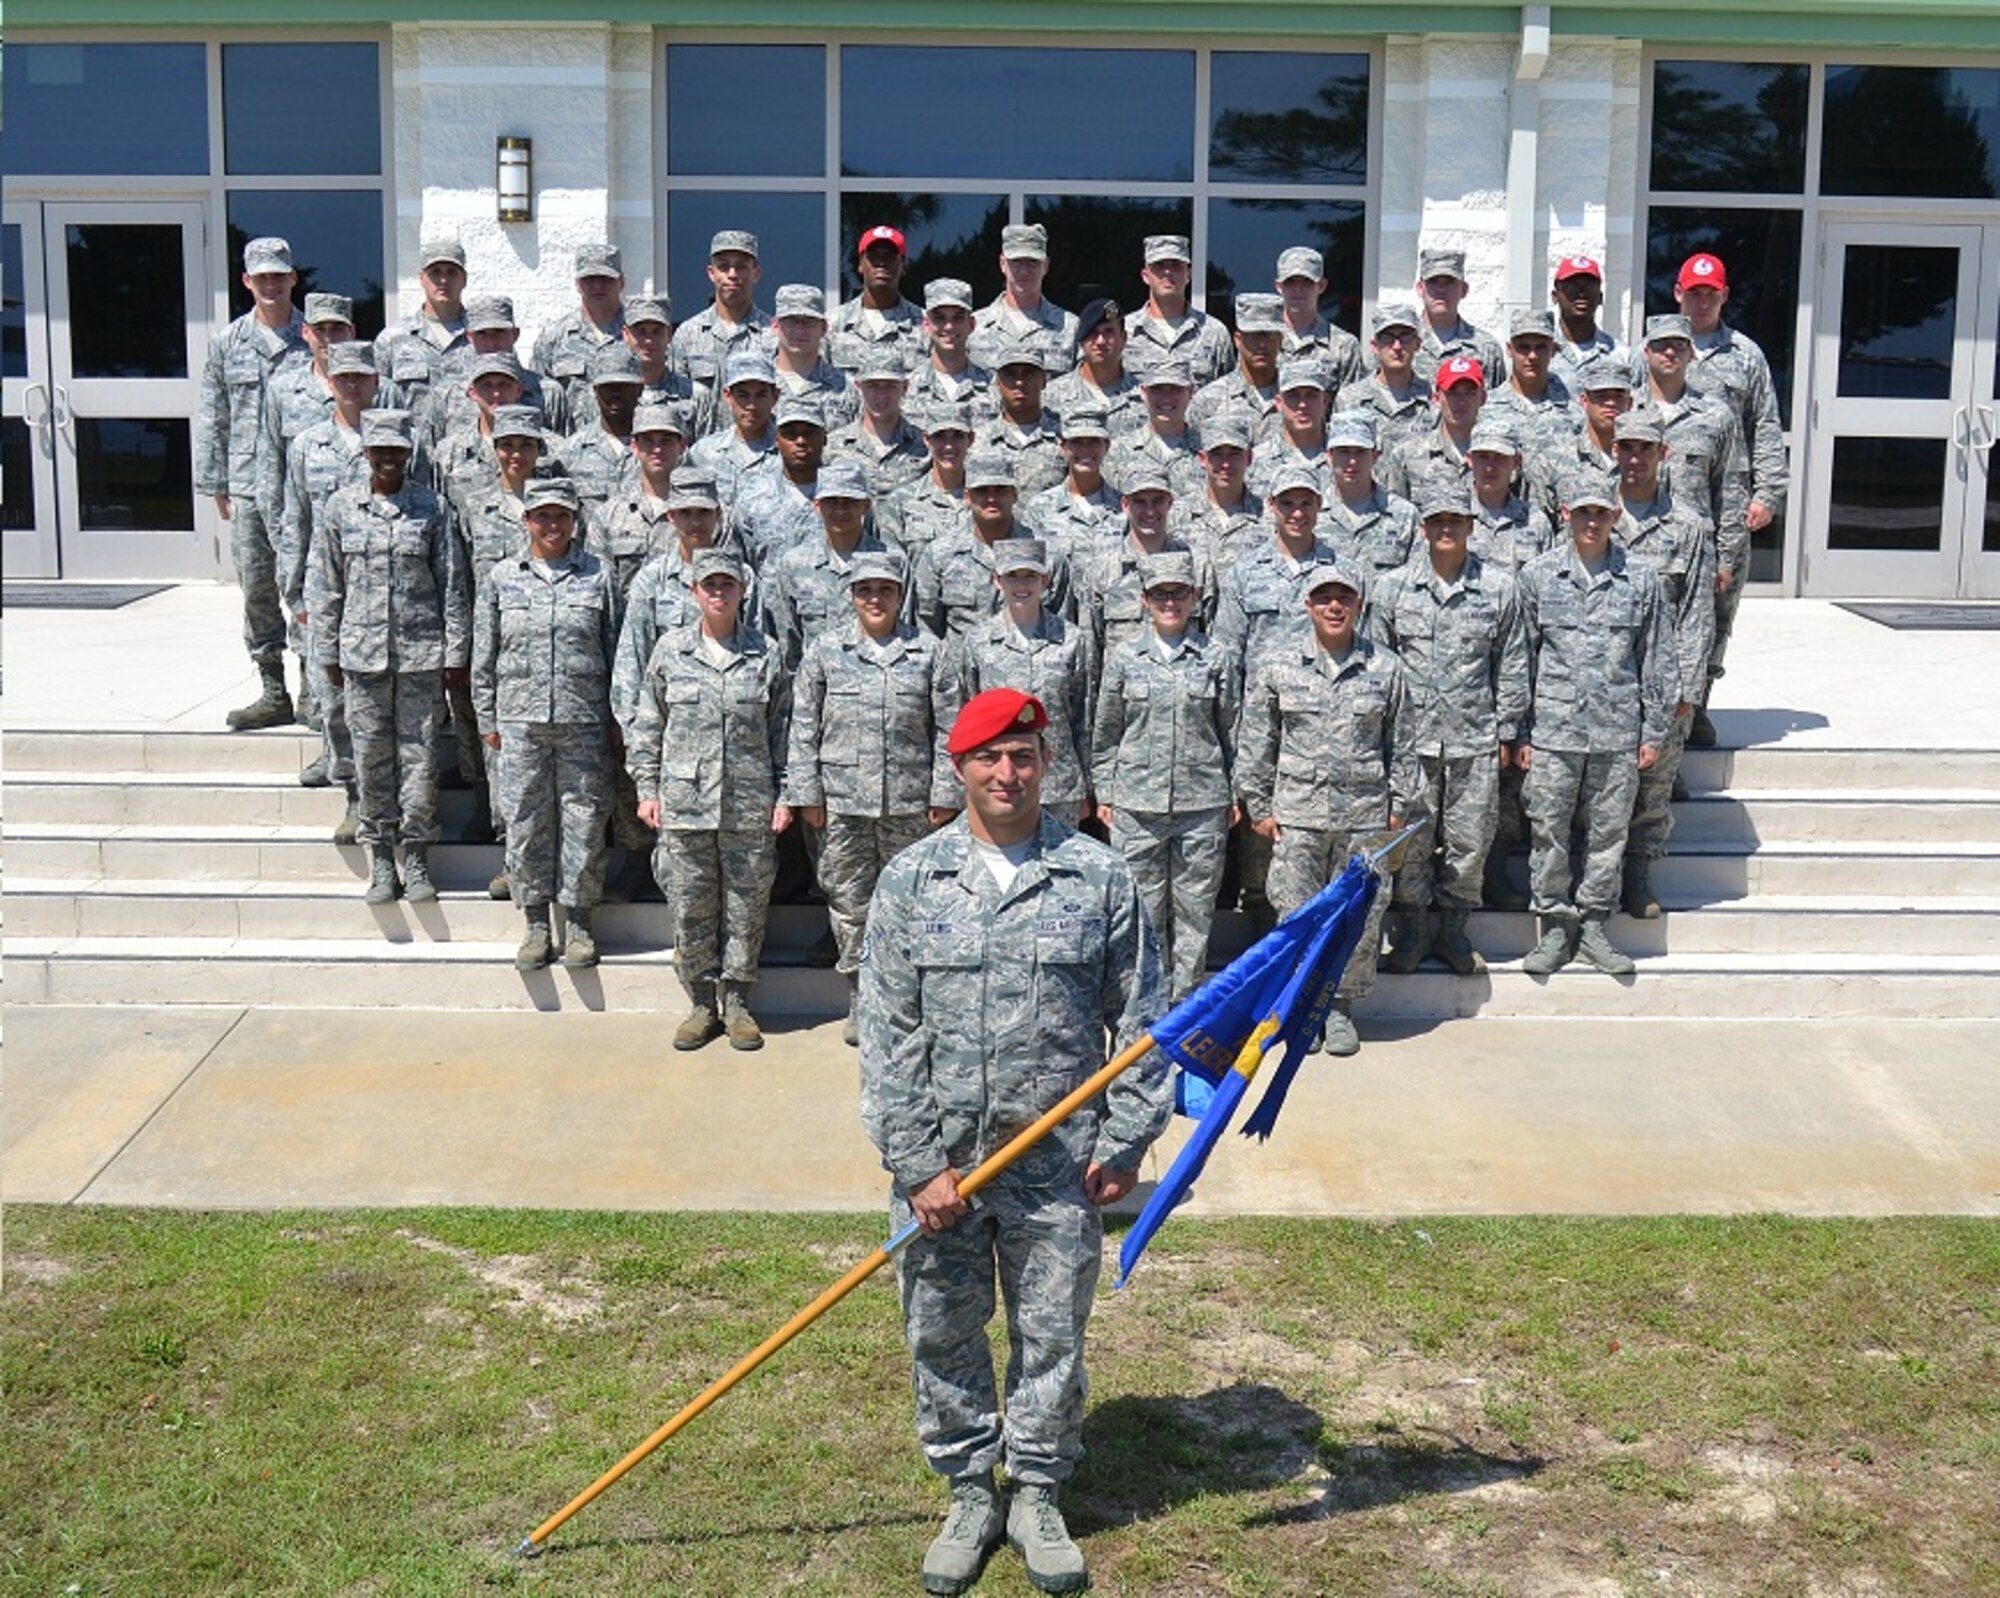 Airmen of Class 14-D pose in front of the Vincent Airman Leadership School at Hurlburt Field, Fla. The class graduated from ALS during a ceremony at the Soundside Club May 8, 2014. (Courtesy photo)